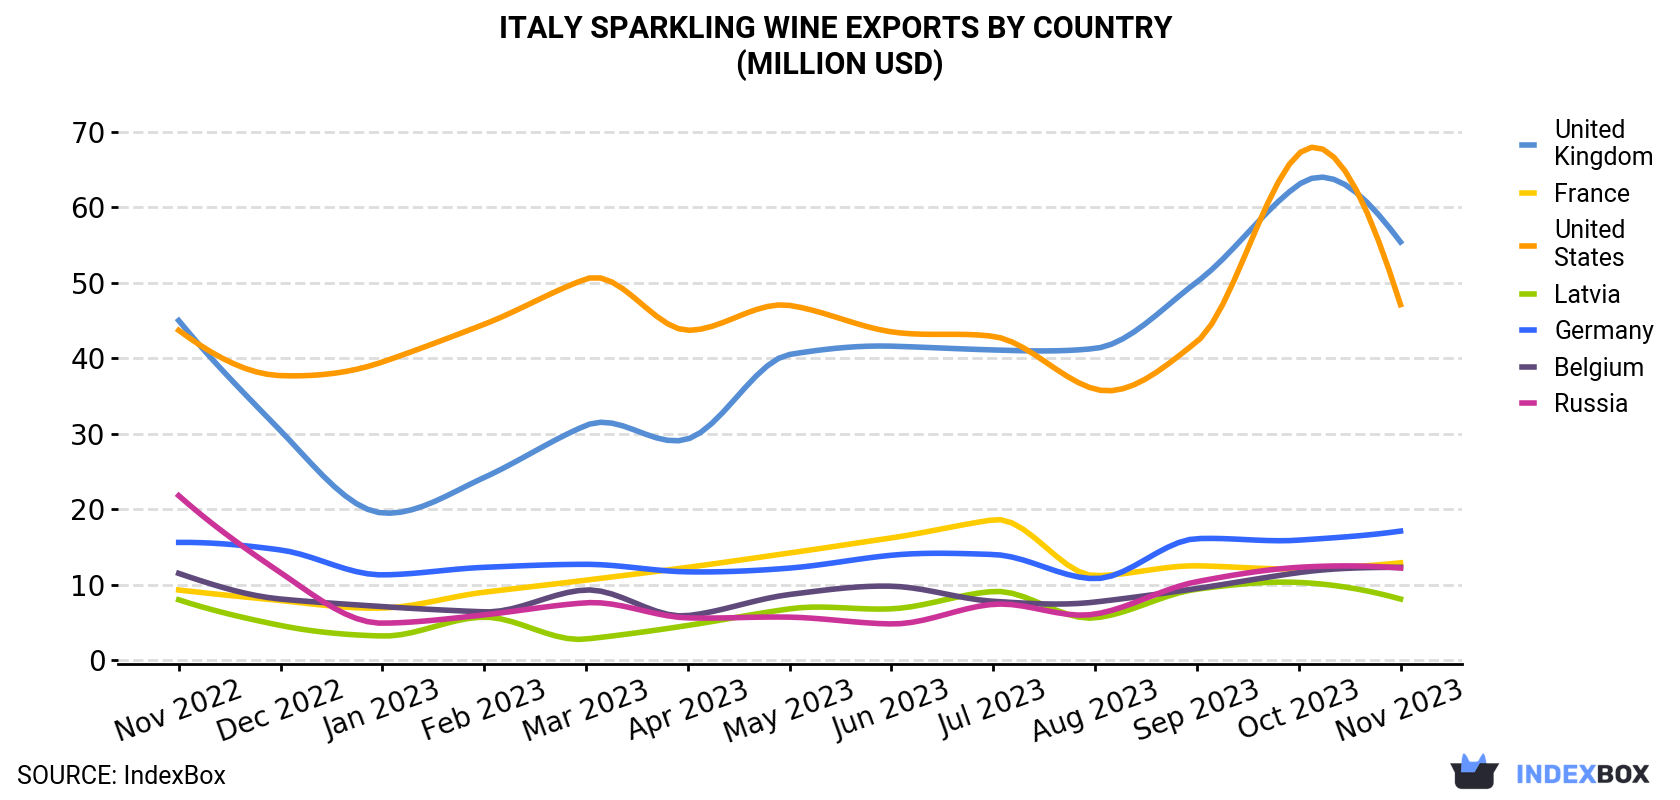 Italy Sparkling Wine Exports By Country (Million USD)